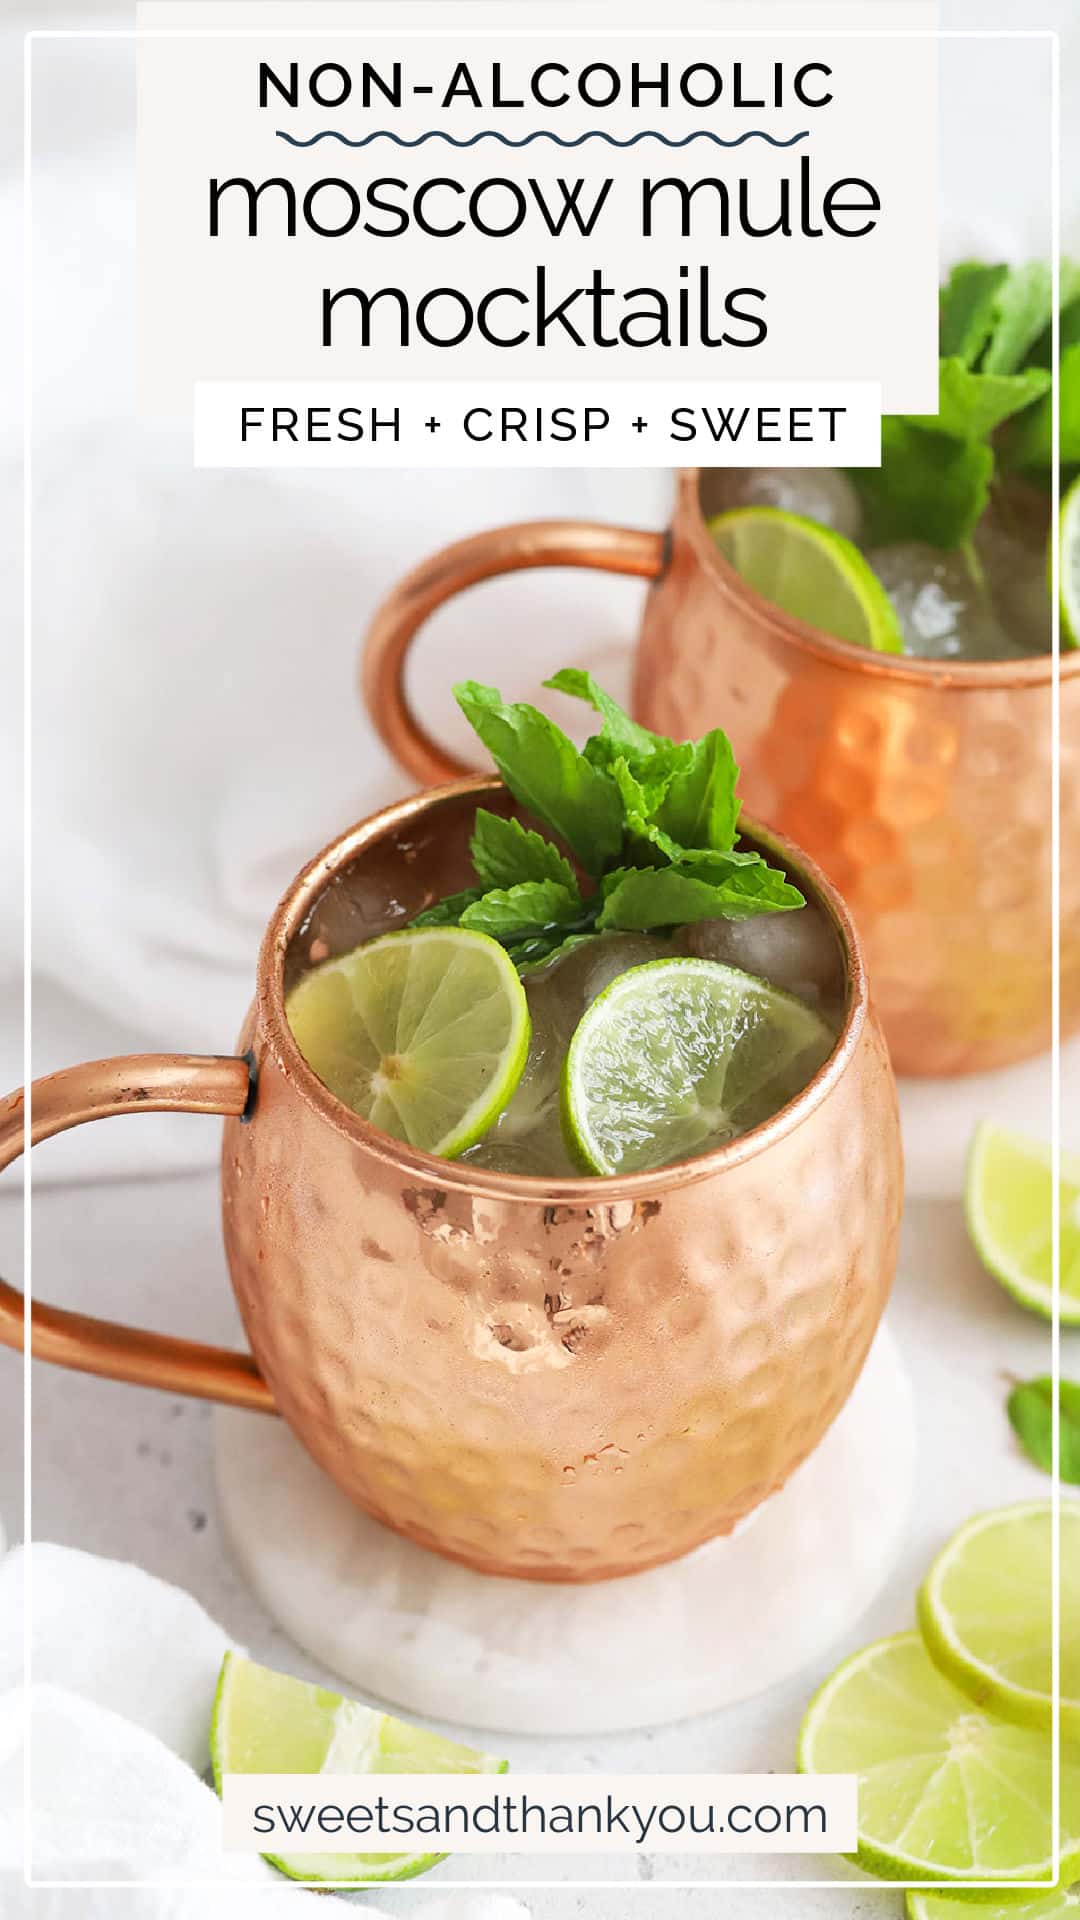 Non-Alcoholic Moscow Mule Mocktail - This virgin moscow mule recipe is sweet, spicy & so refreshing. A perfect party drink! // non-alcoholic moscow mule recipe / moscow mule mocktails / ginger beer mocktail / ginger mocktail / holiday mocktail / how to make a virgin moscow mule / moscow mule mocktail ingredients / virgin party drink / non alcoholic holiday drink / mocktail with ginger beer